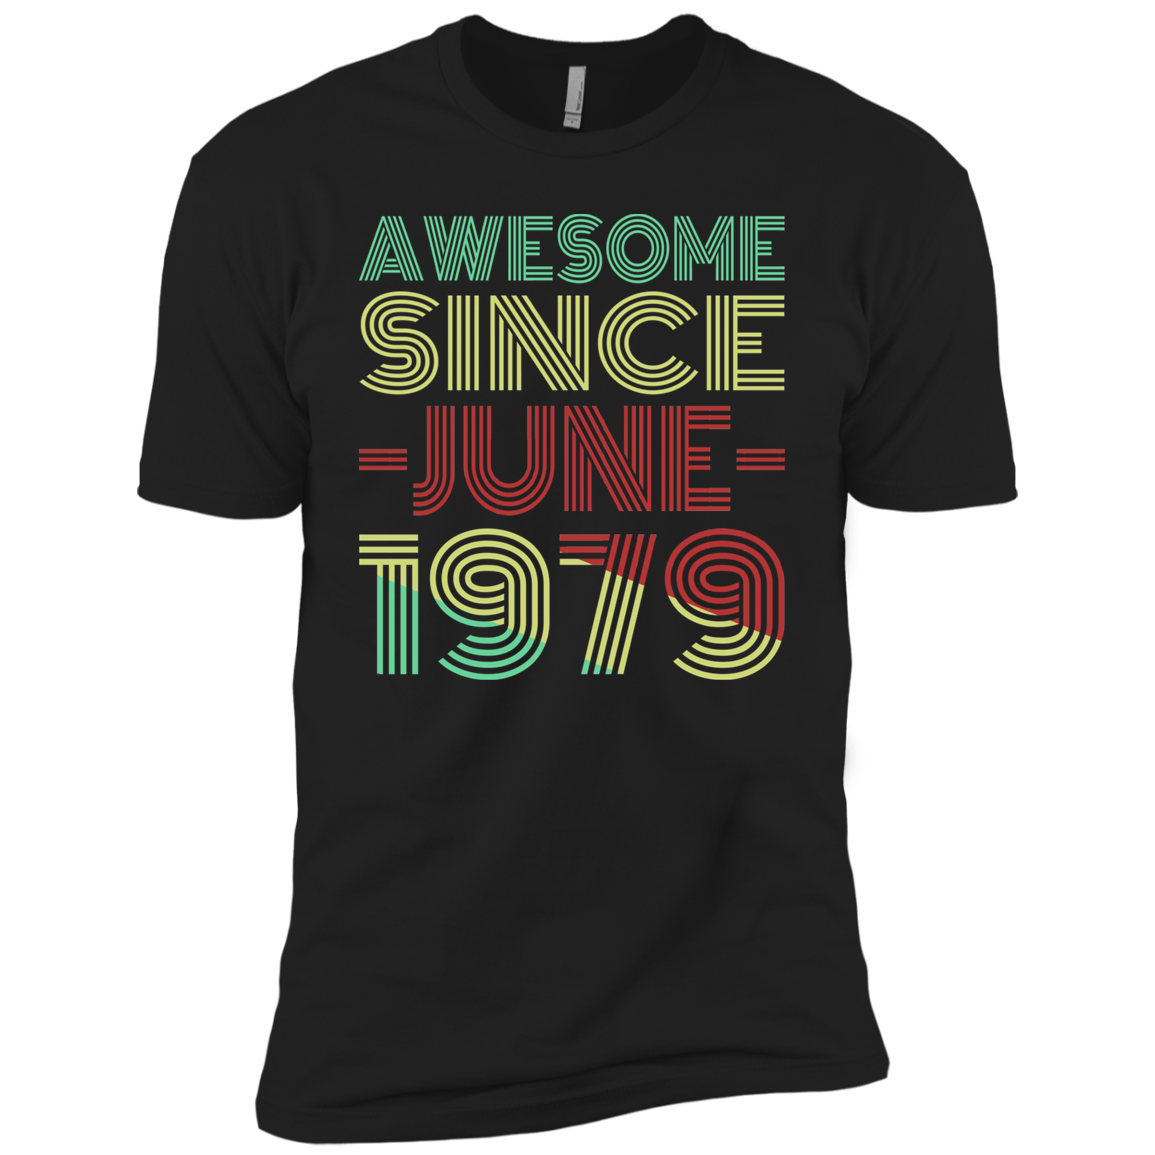 Awesome Since June 1979 Premium Short Sleeve T-Shirt